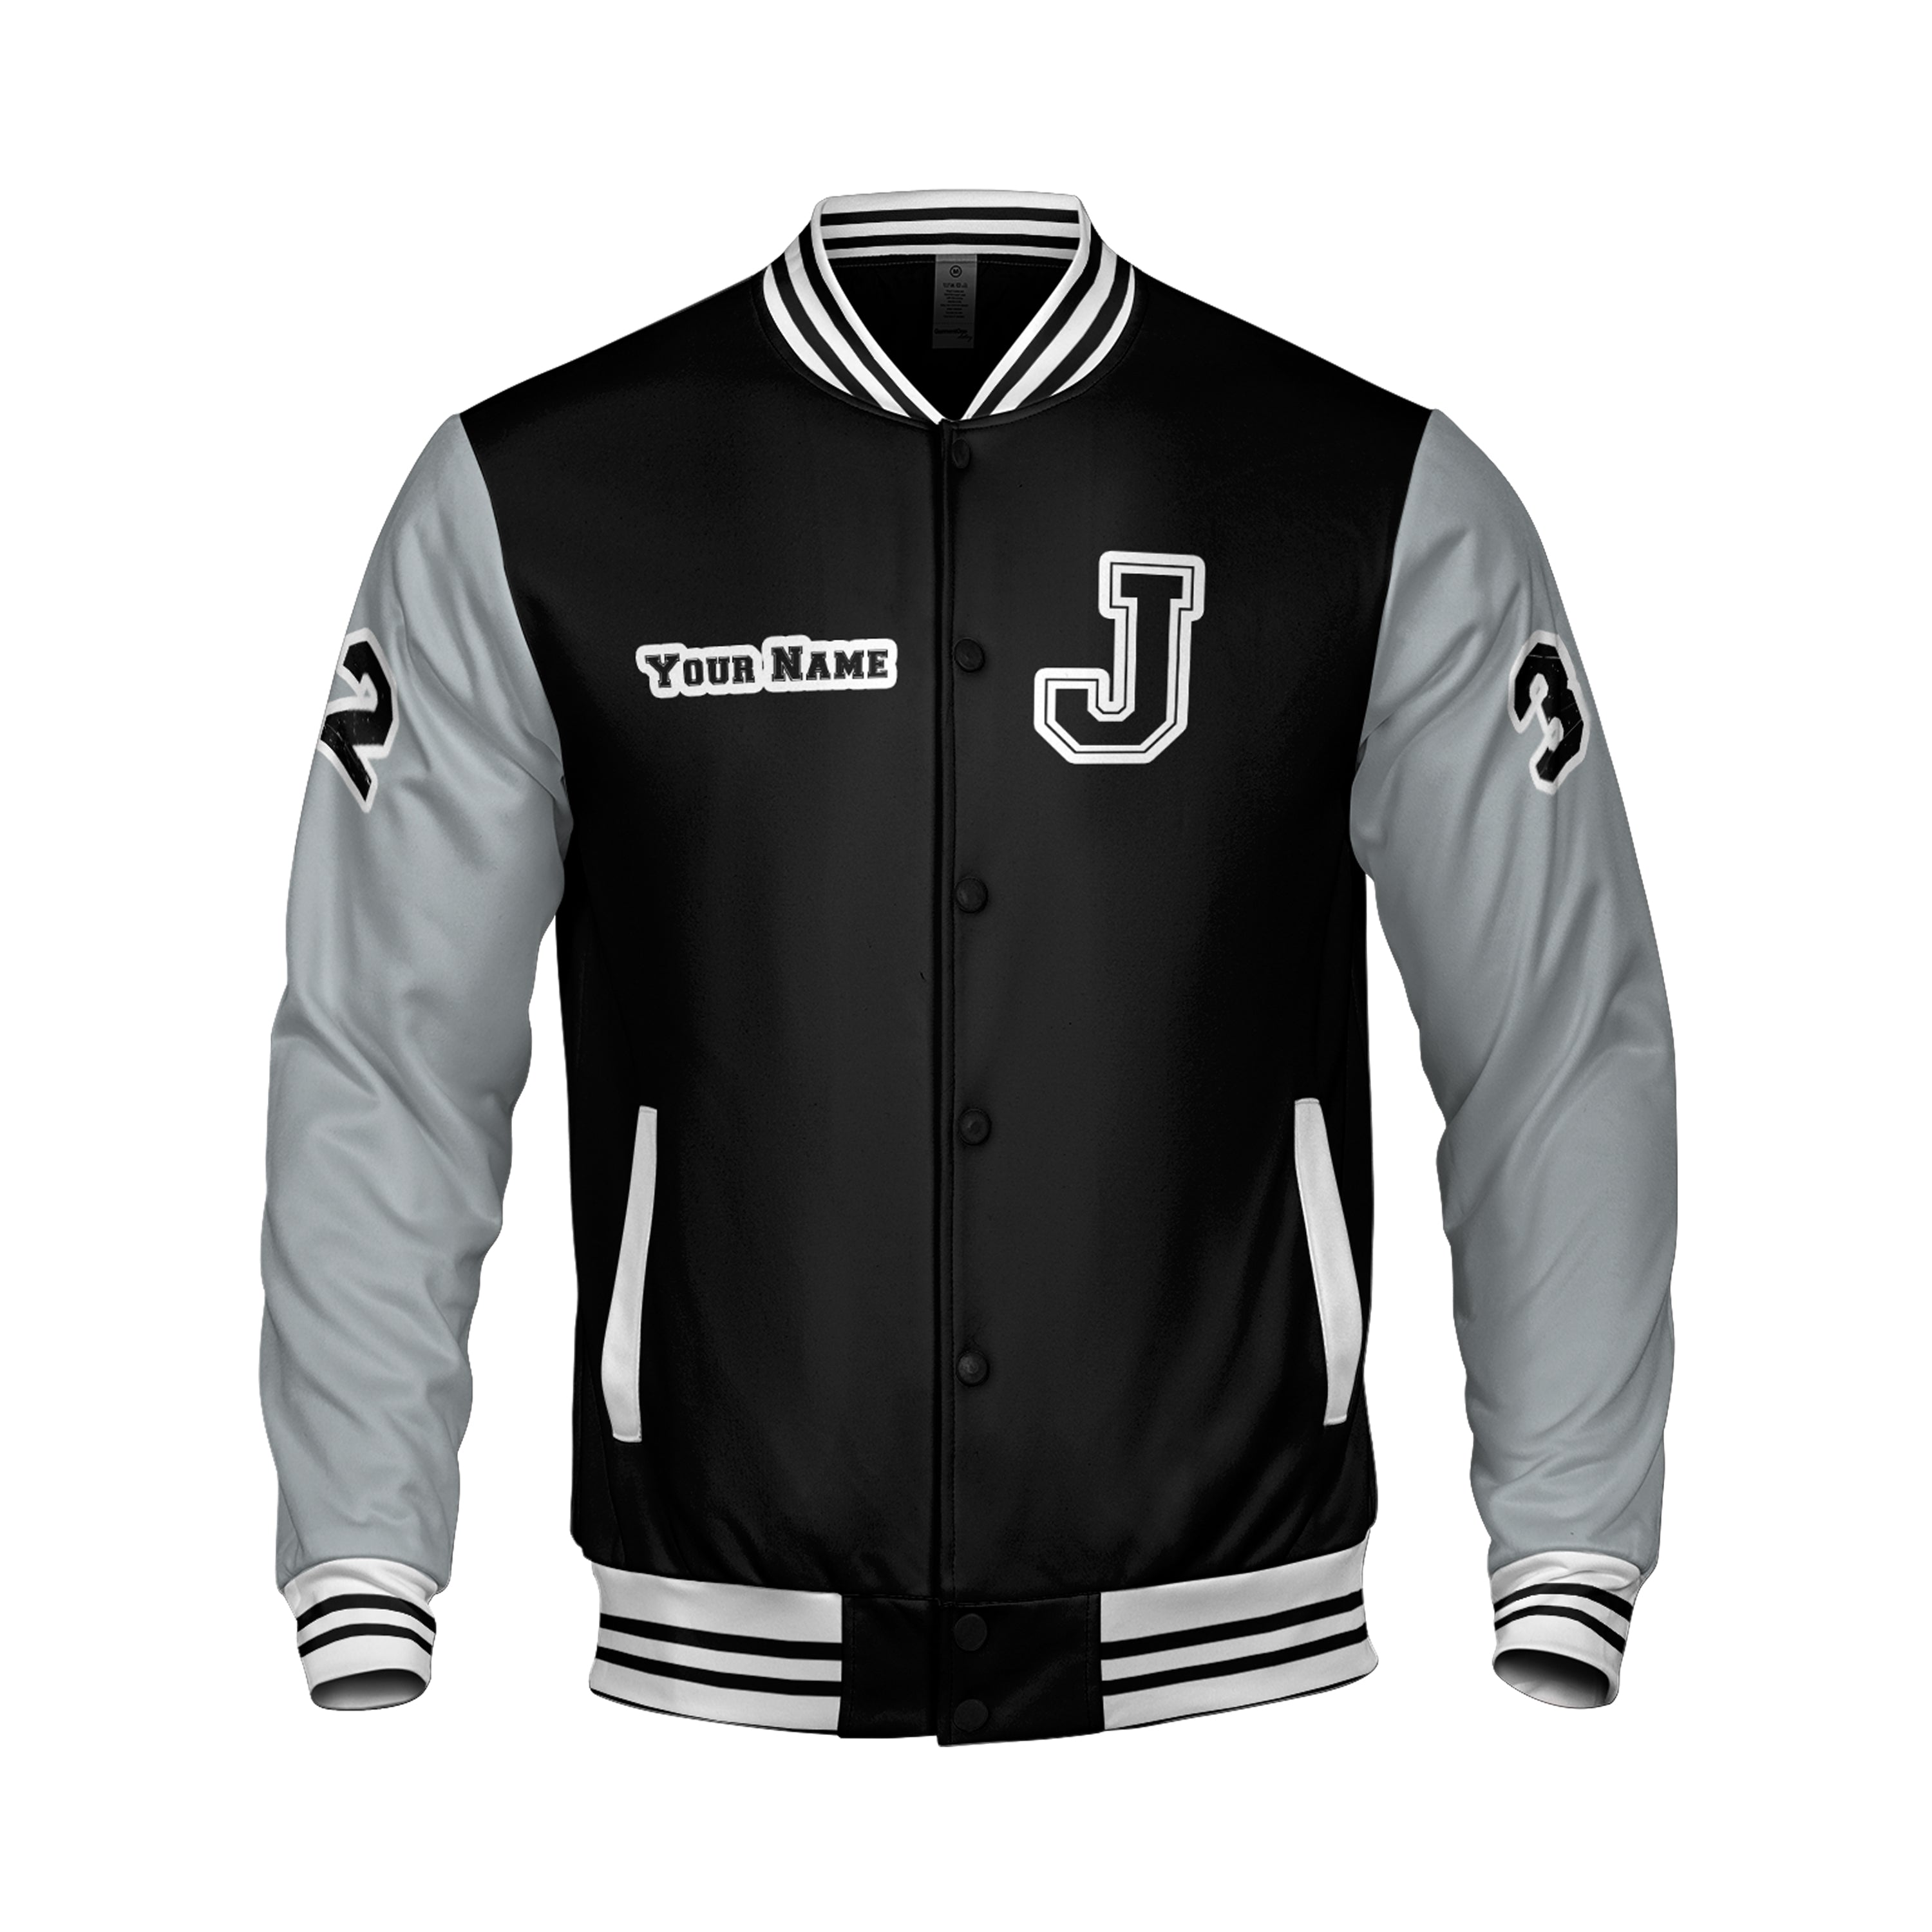 Straight To Hell - Jet wool varsity jacket in 1 of 3 color combinations.  Fitted, snap closure, D pocket stitching, and fabric detail under collar.  Engraved metal church key hangs from inside